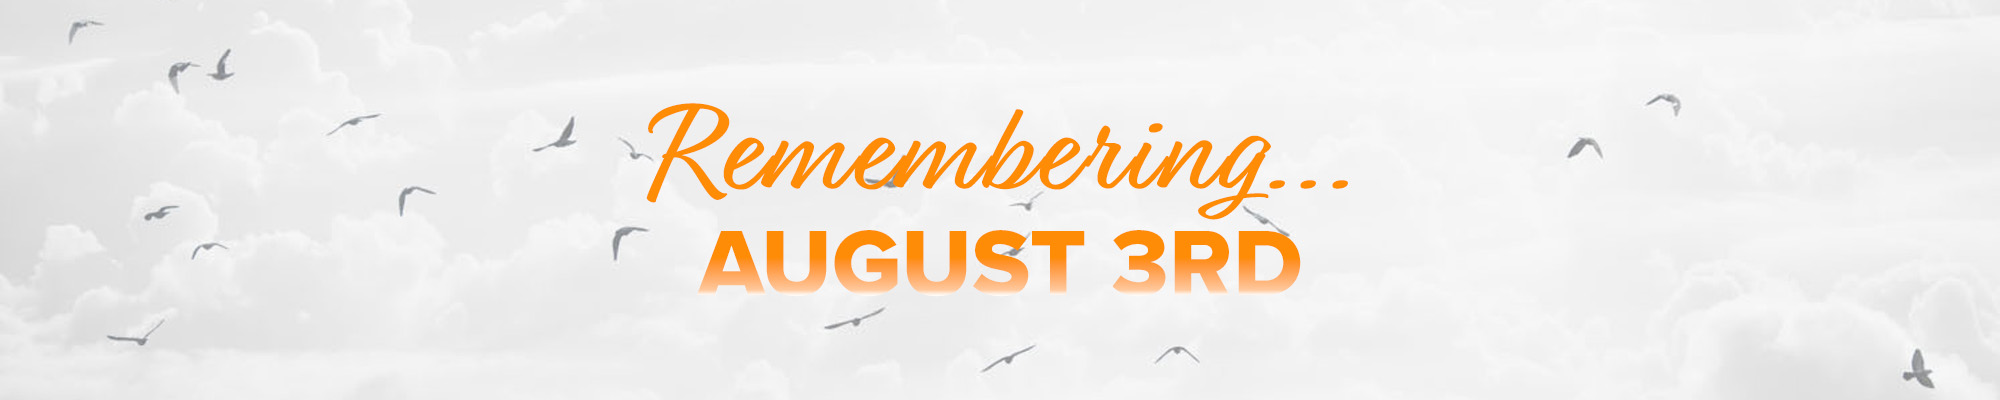 Remembering August 3rd